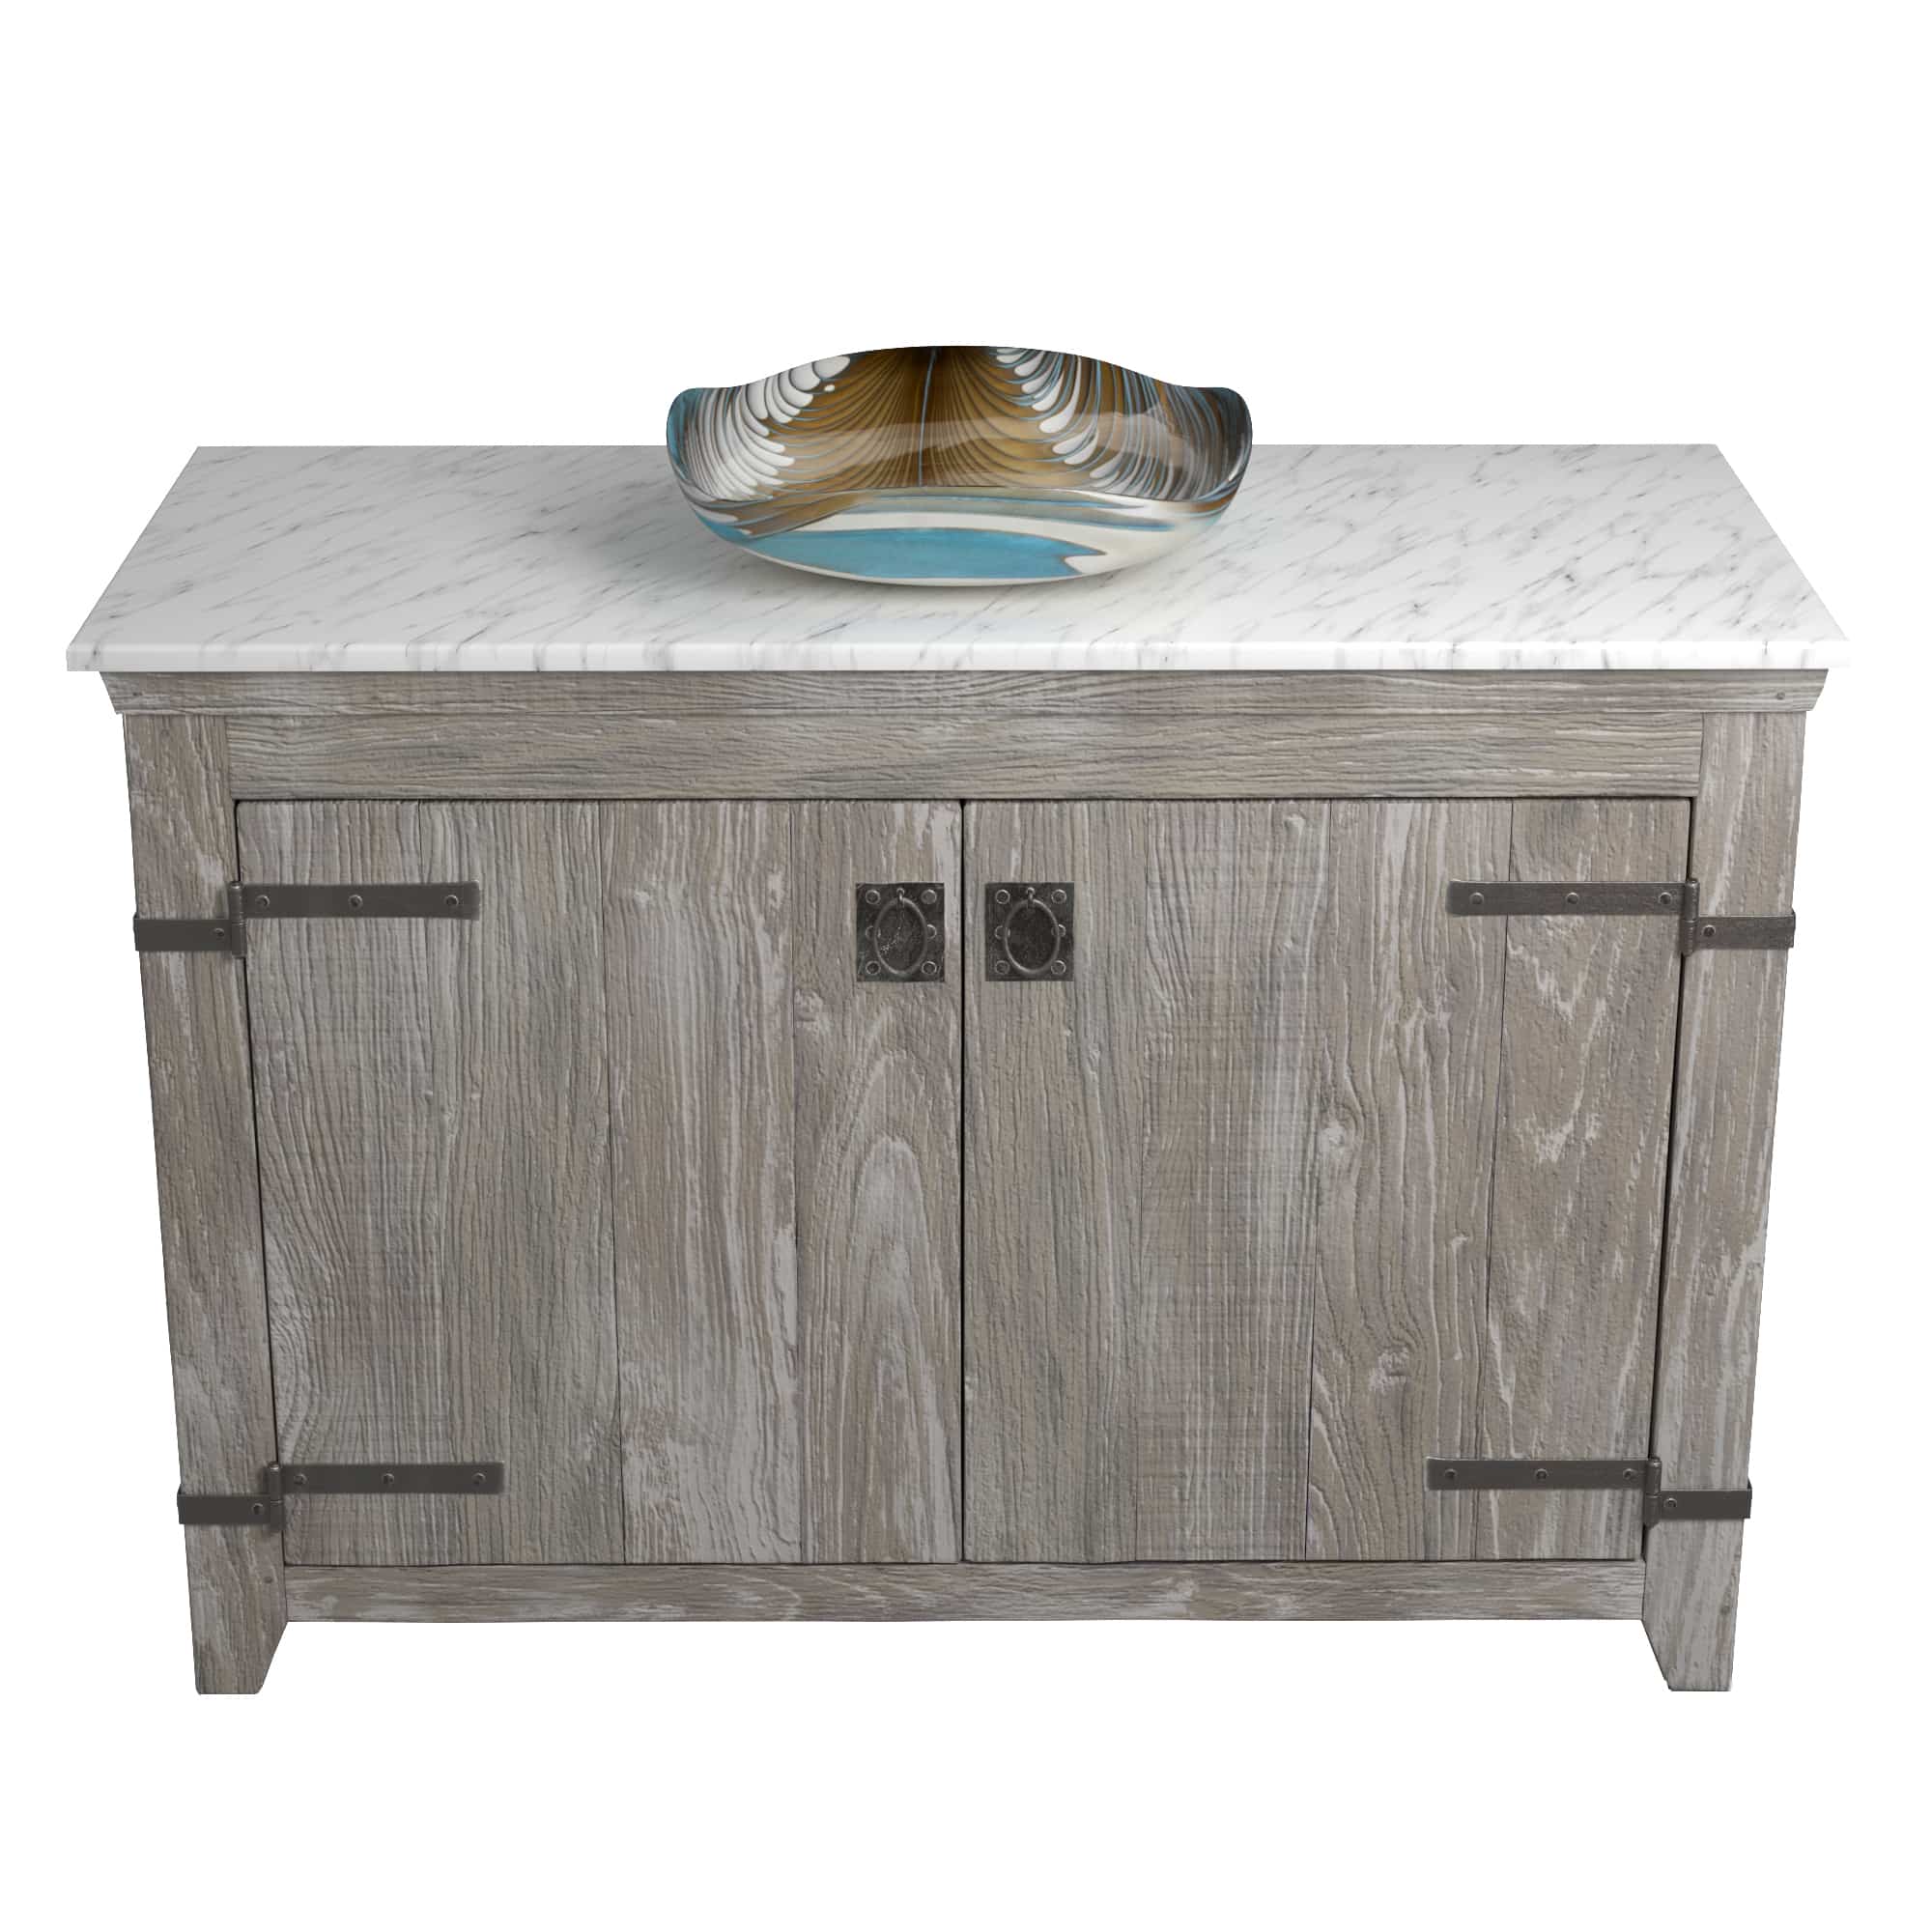 Native Trails 48" Americana Vanity in Driftwood with Carrara Marble Top and Lido in Shoreline, Single Faucet Hole, BND48-VB-CT-MG-031